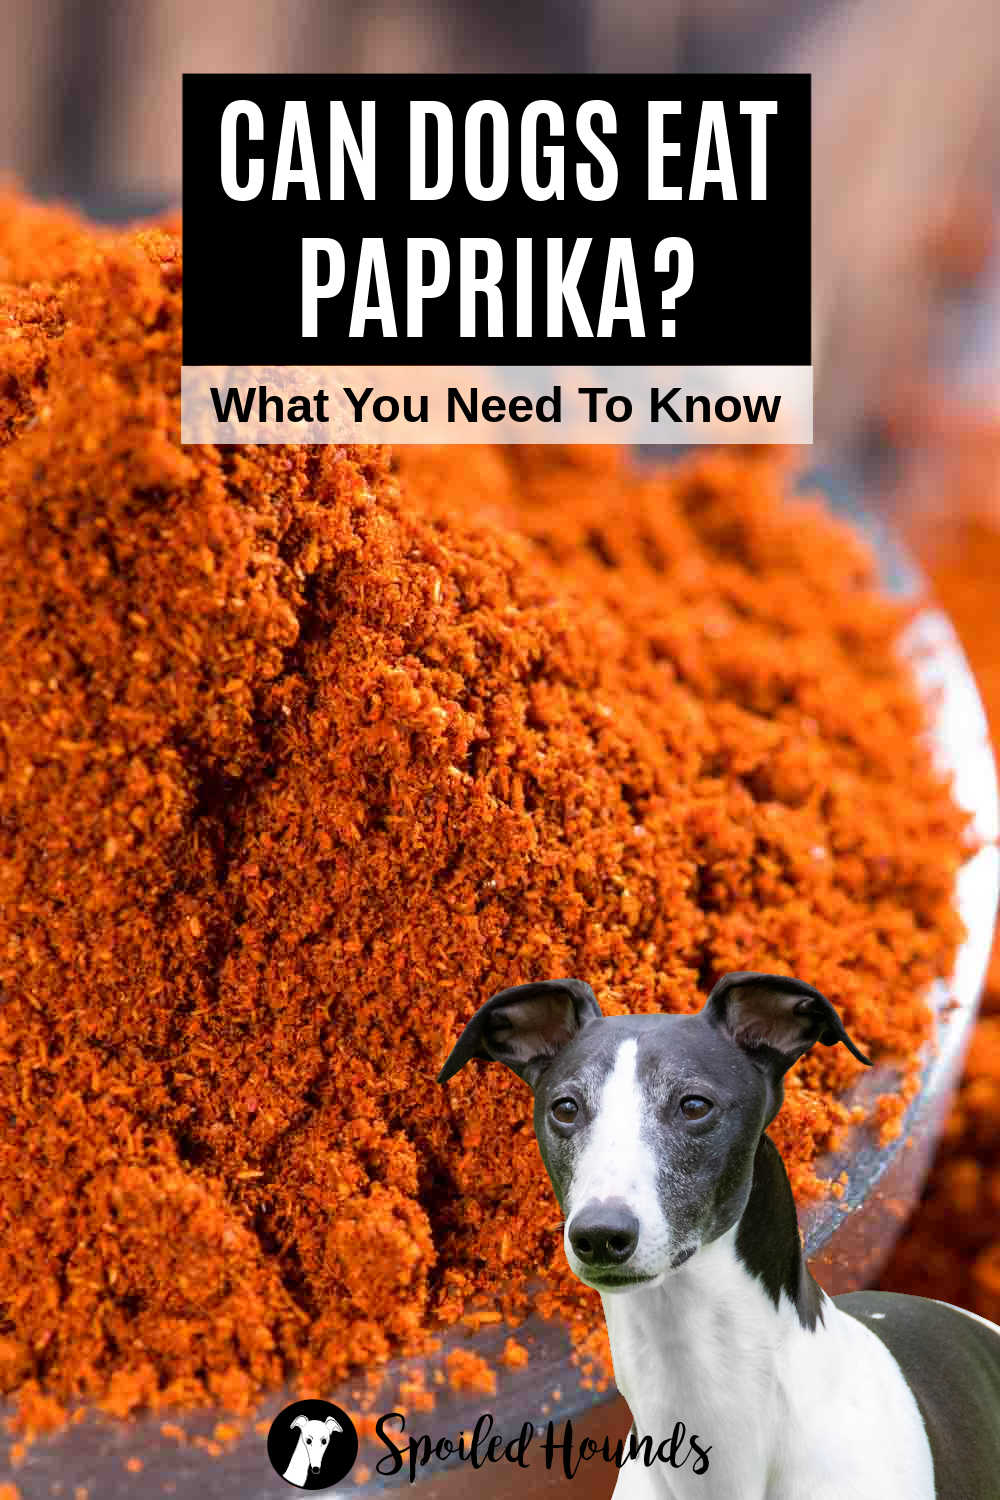 Whipped dog in front of a bowl of paprika.